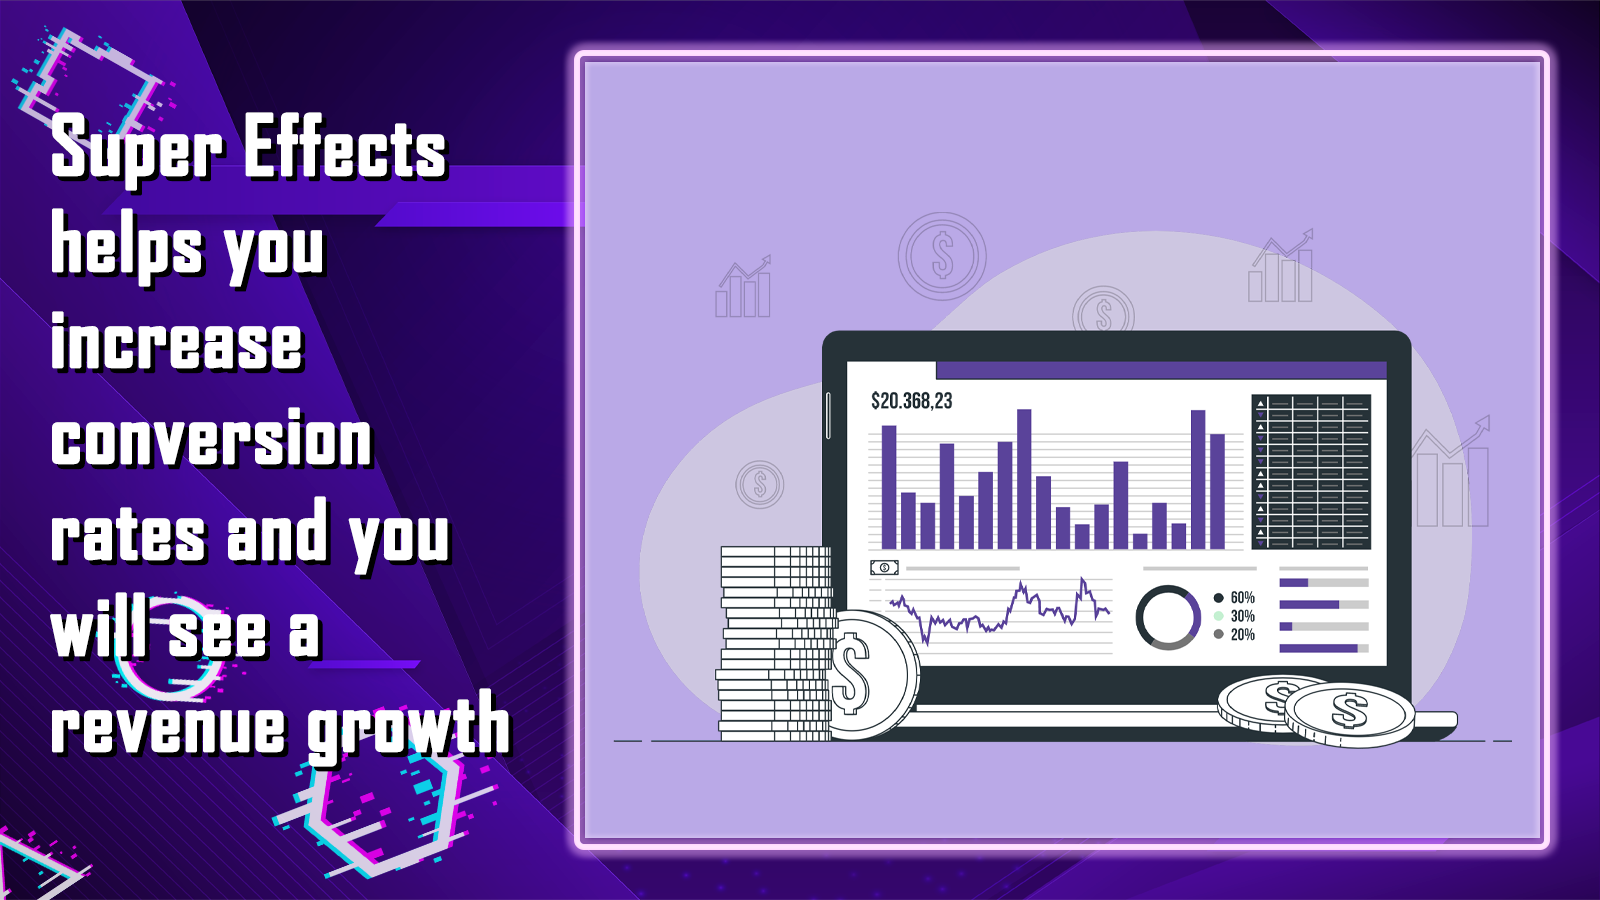 Super Effects helps you grow your seasonal revenue